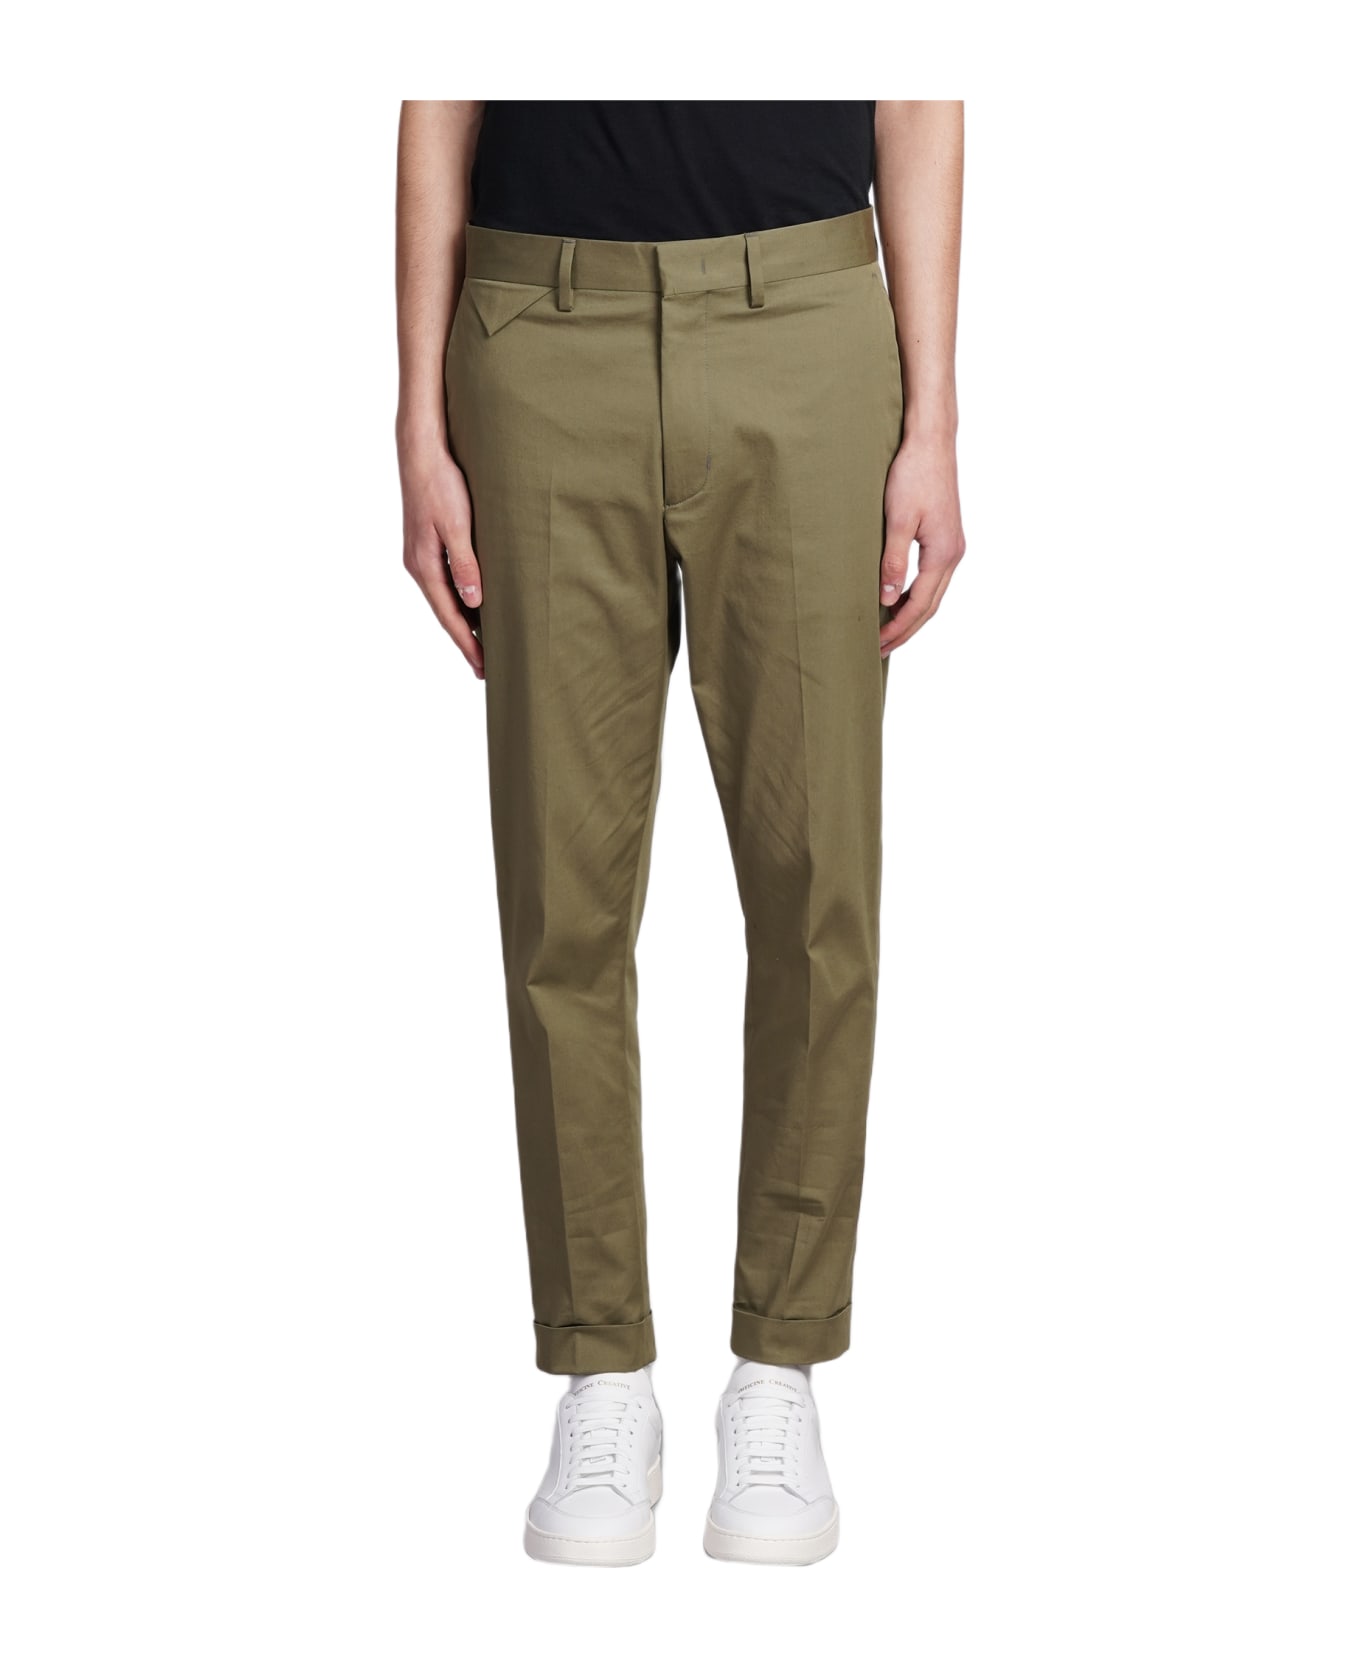 Low Brand Cooper T1.7 Pants In Green Cotton - green